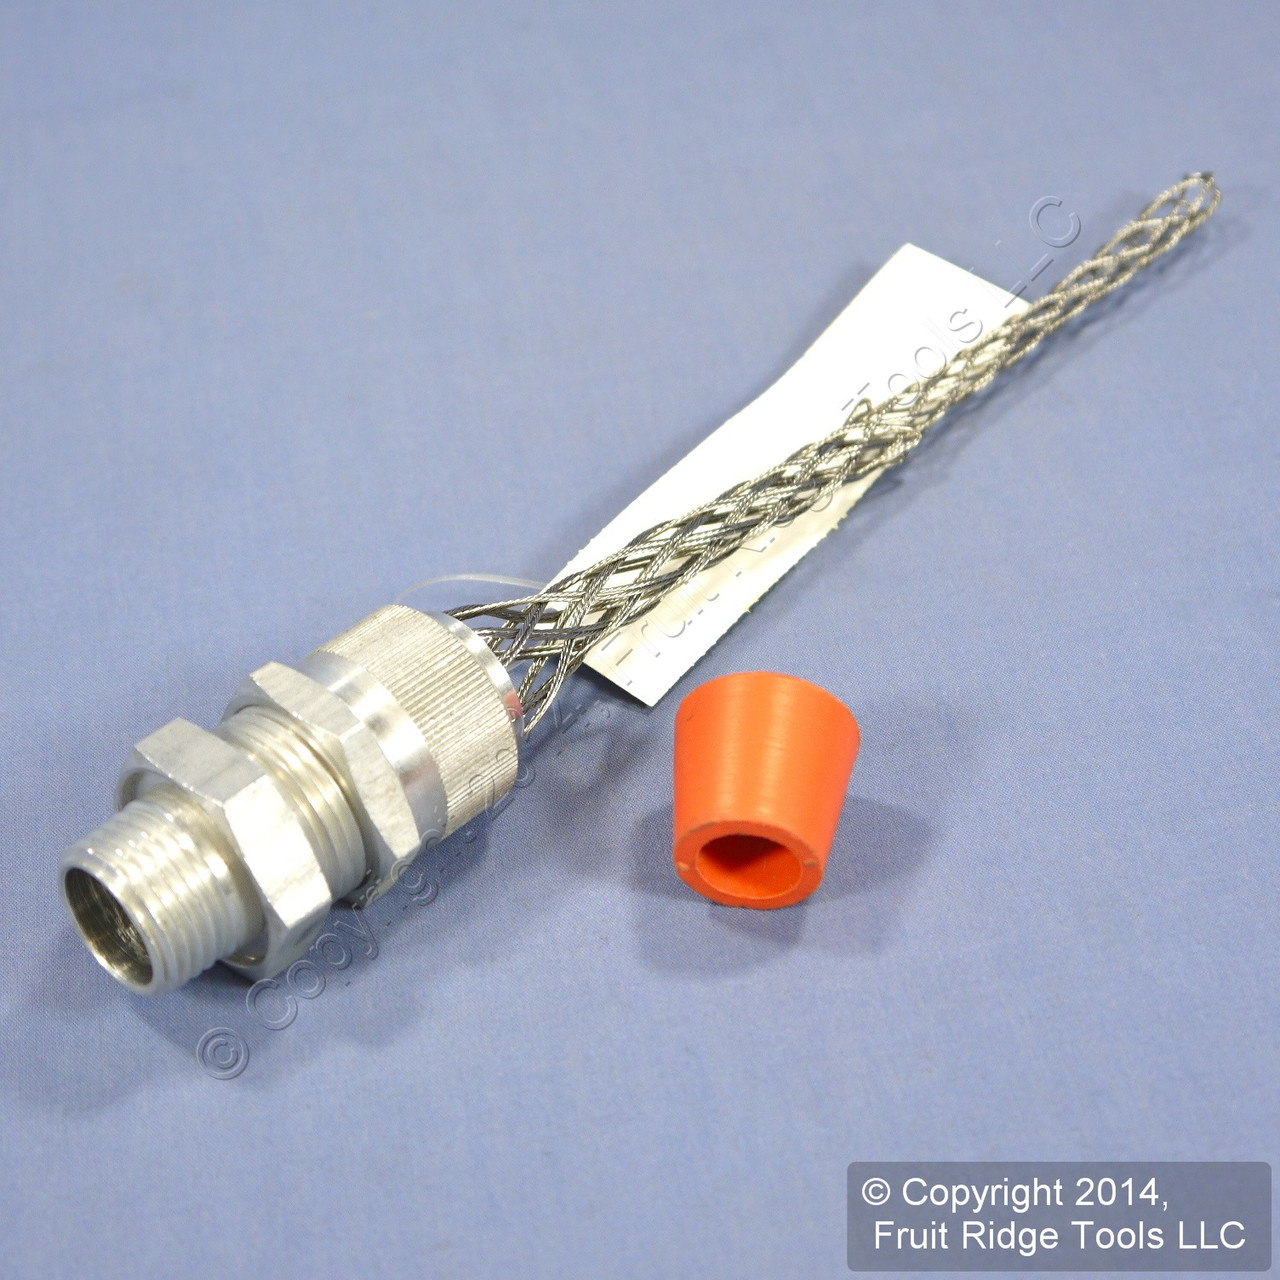 Deluxe Cord Wire Mesh Grips for Strain Relief